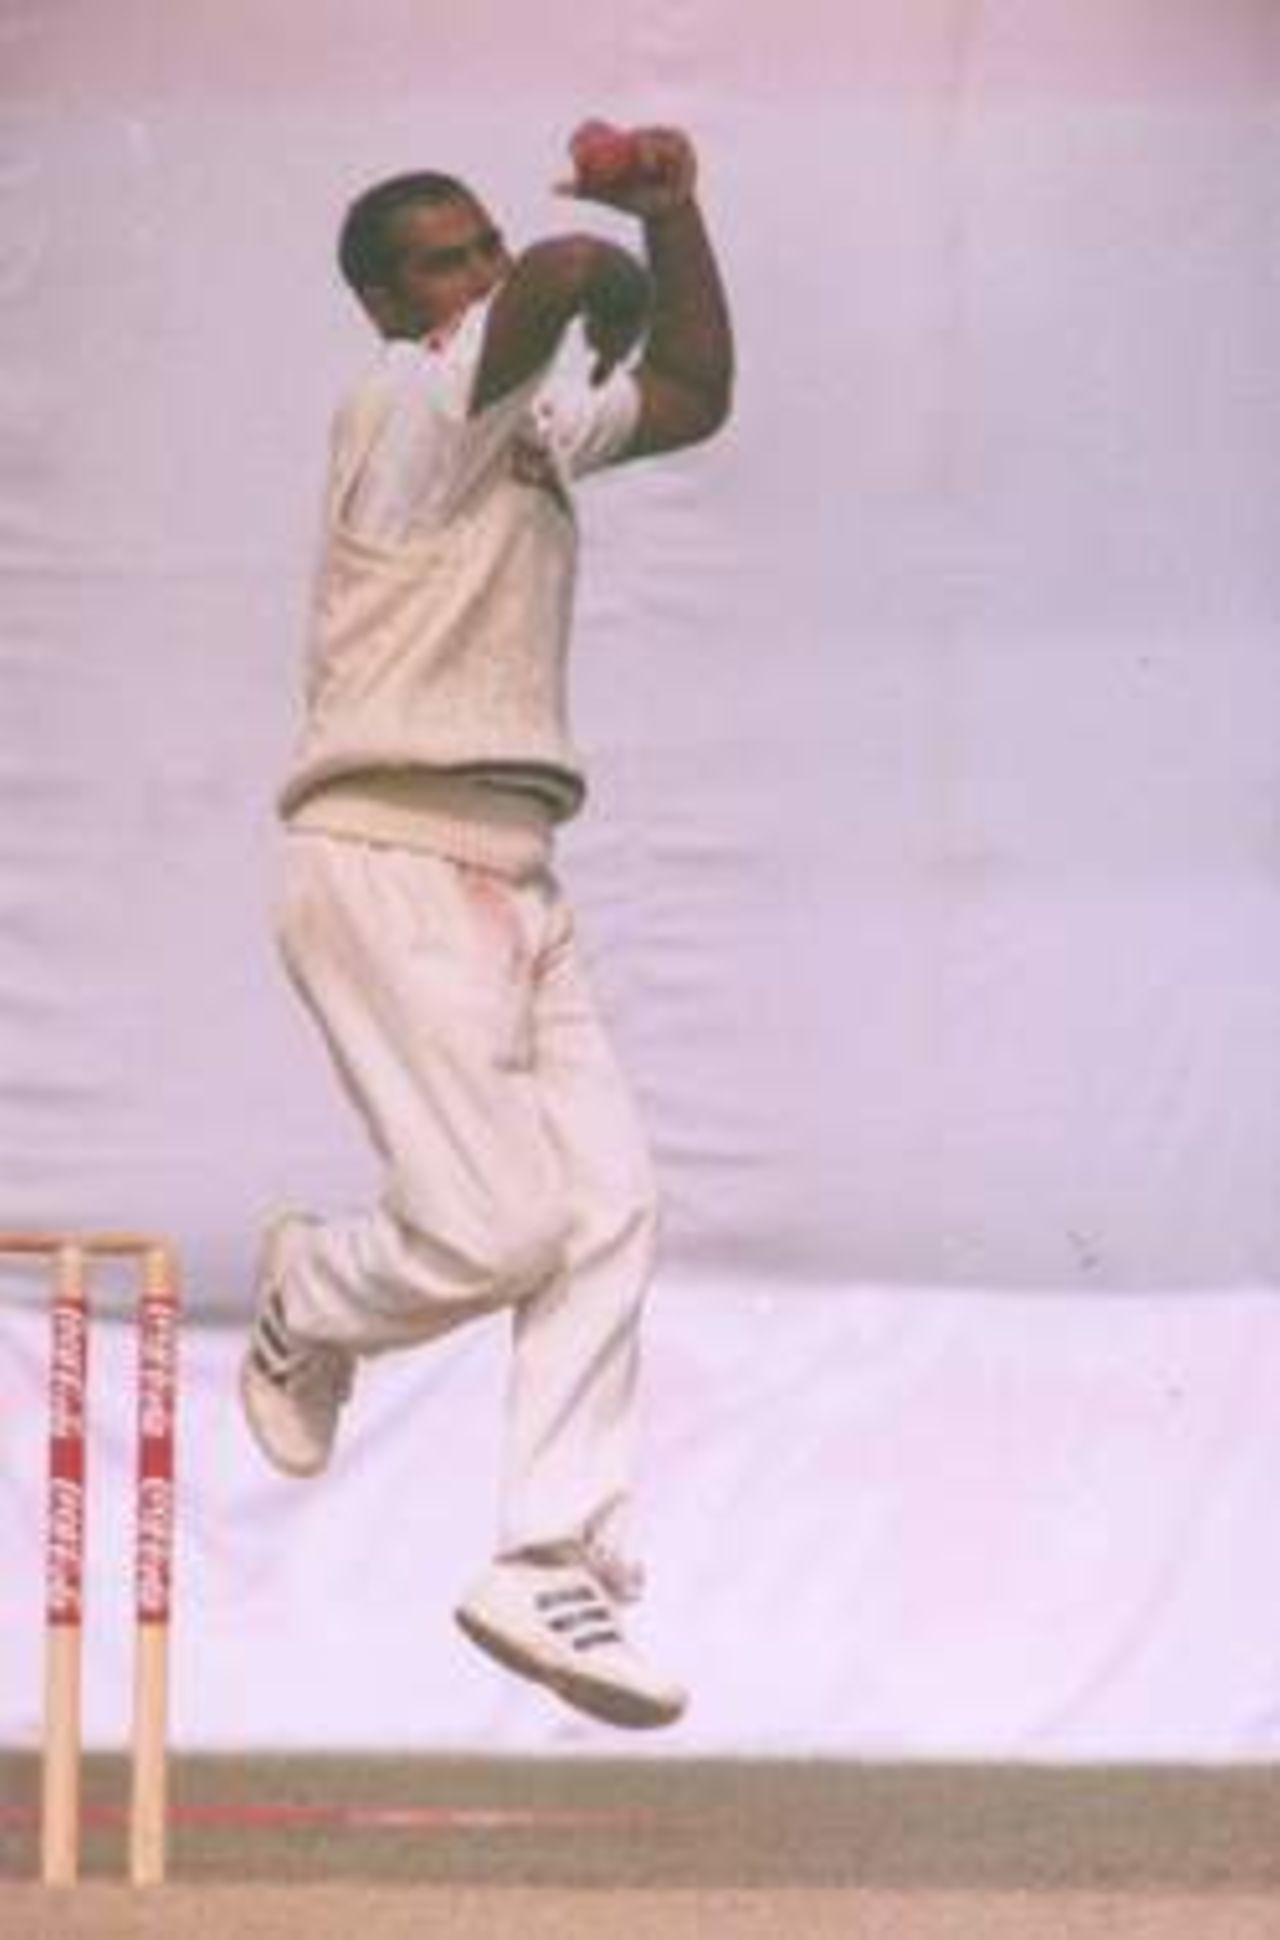 Enamul in action against Pakistan at Dhaka Test